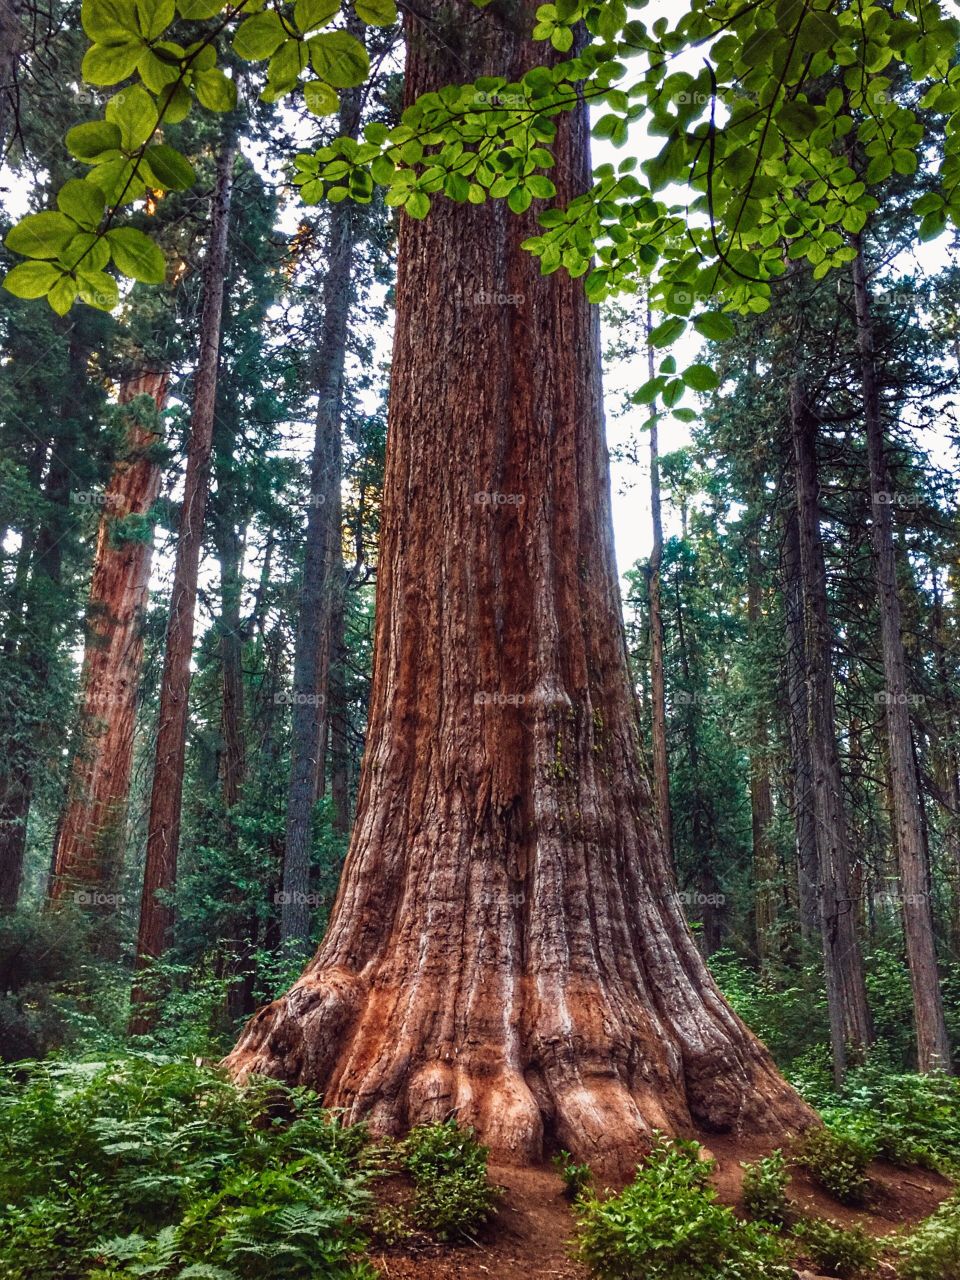 Giant redwood tree in the forest